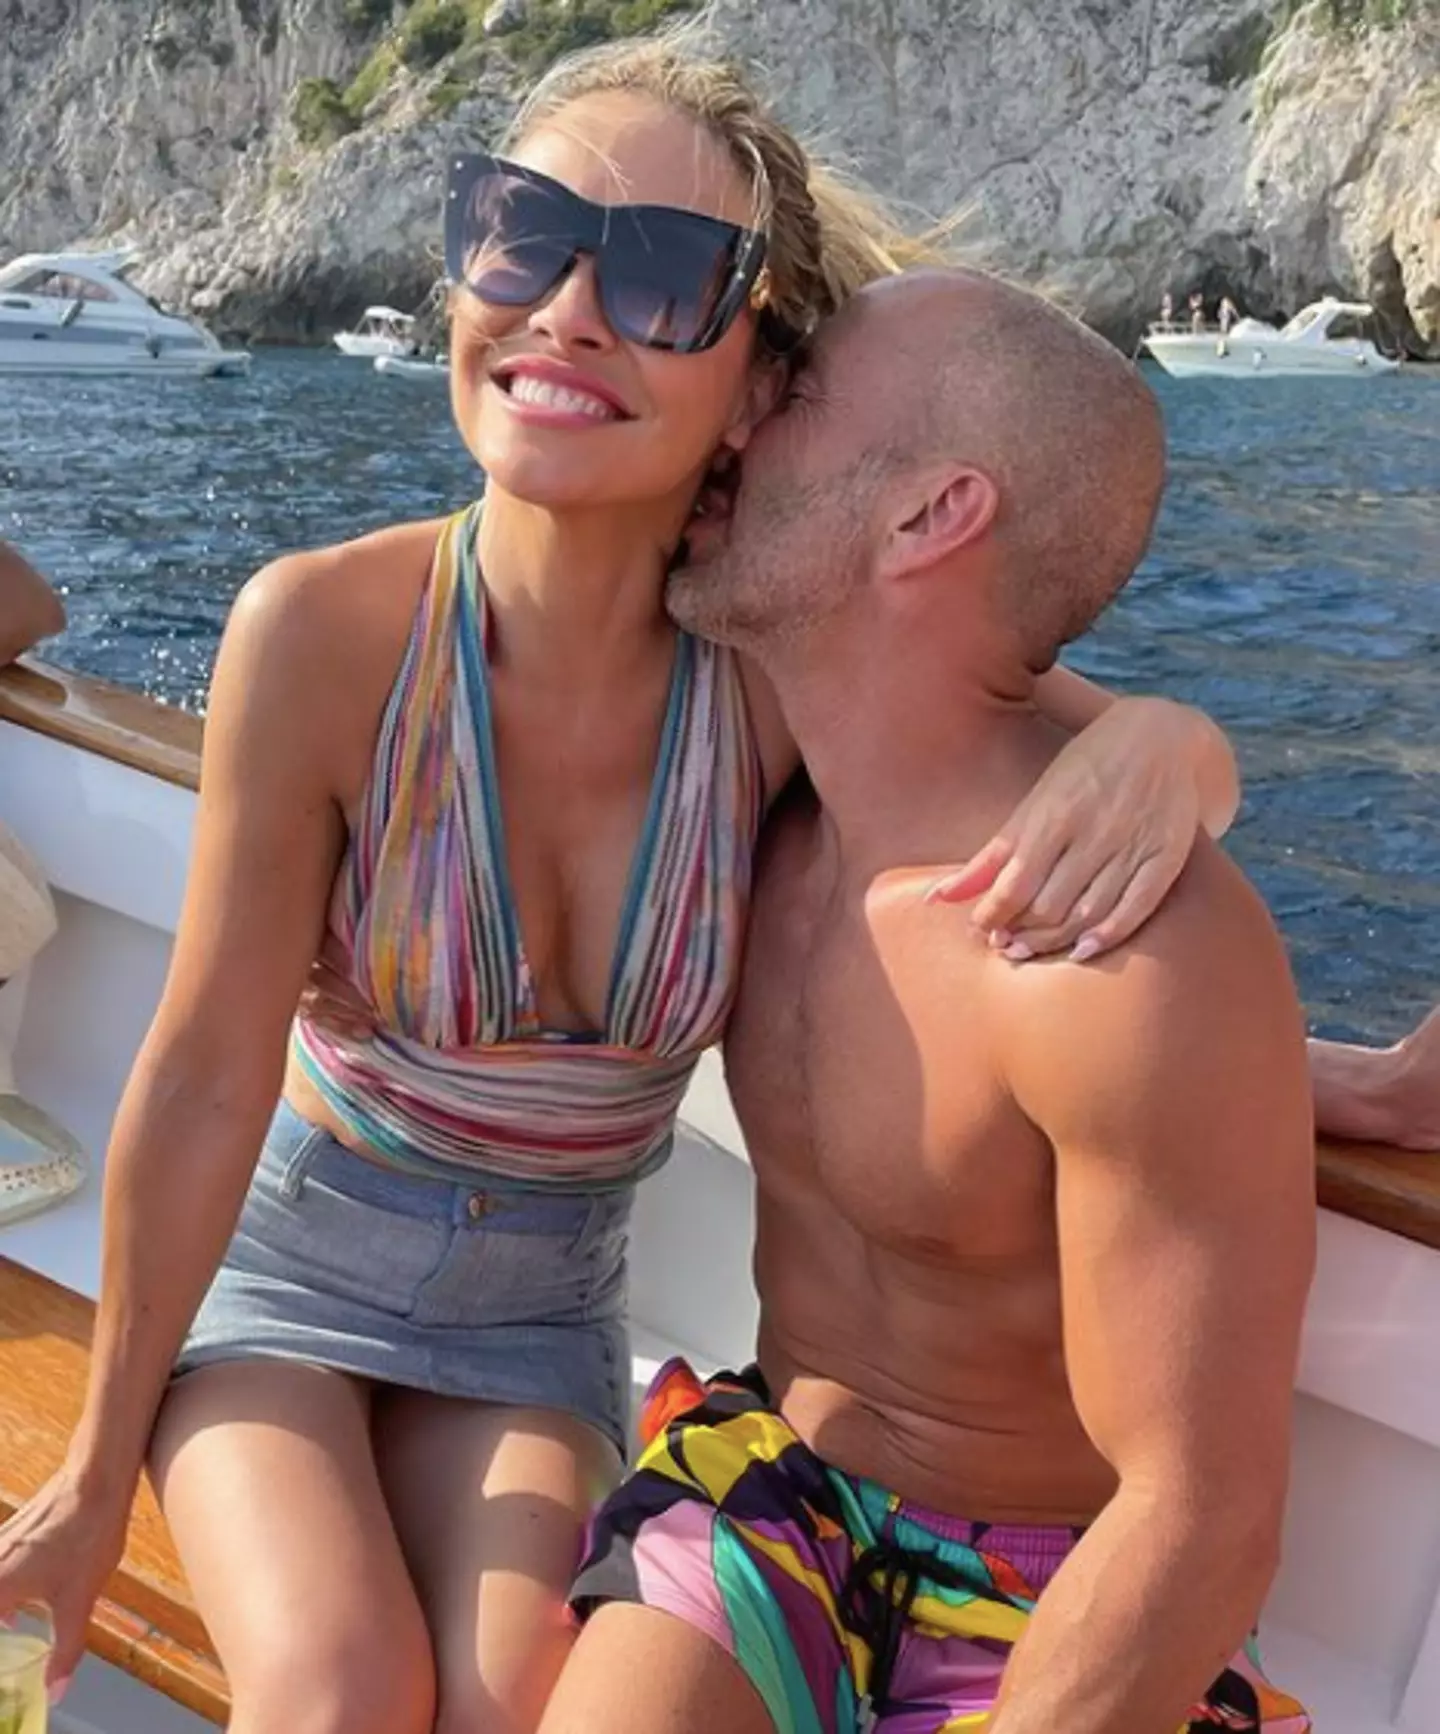 Selling Sunset's Chrishell Stause and Jason Oppenheim have confirmed they are dating (